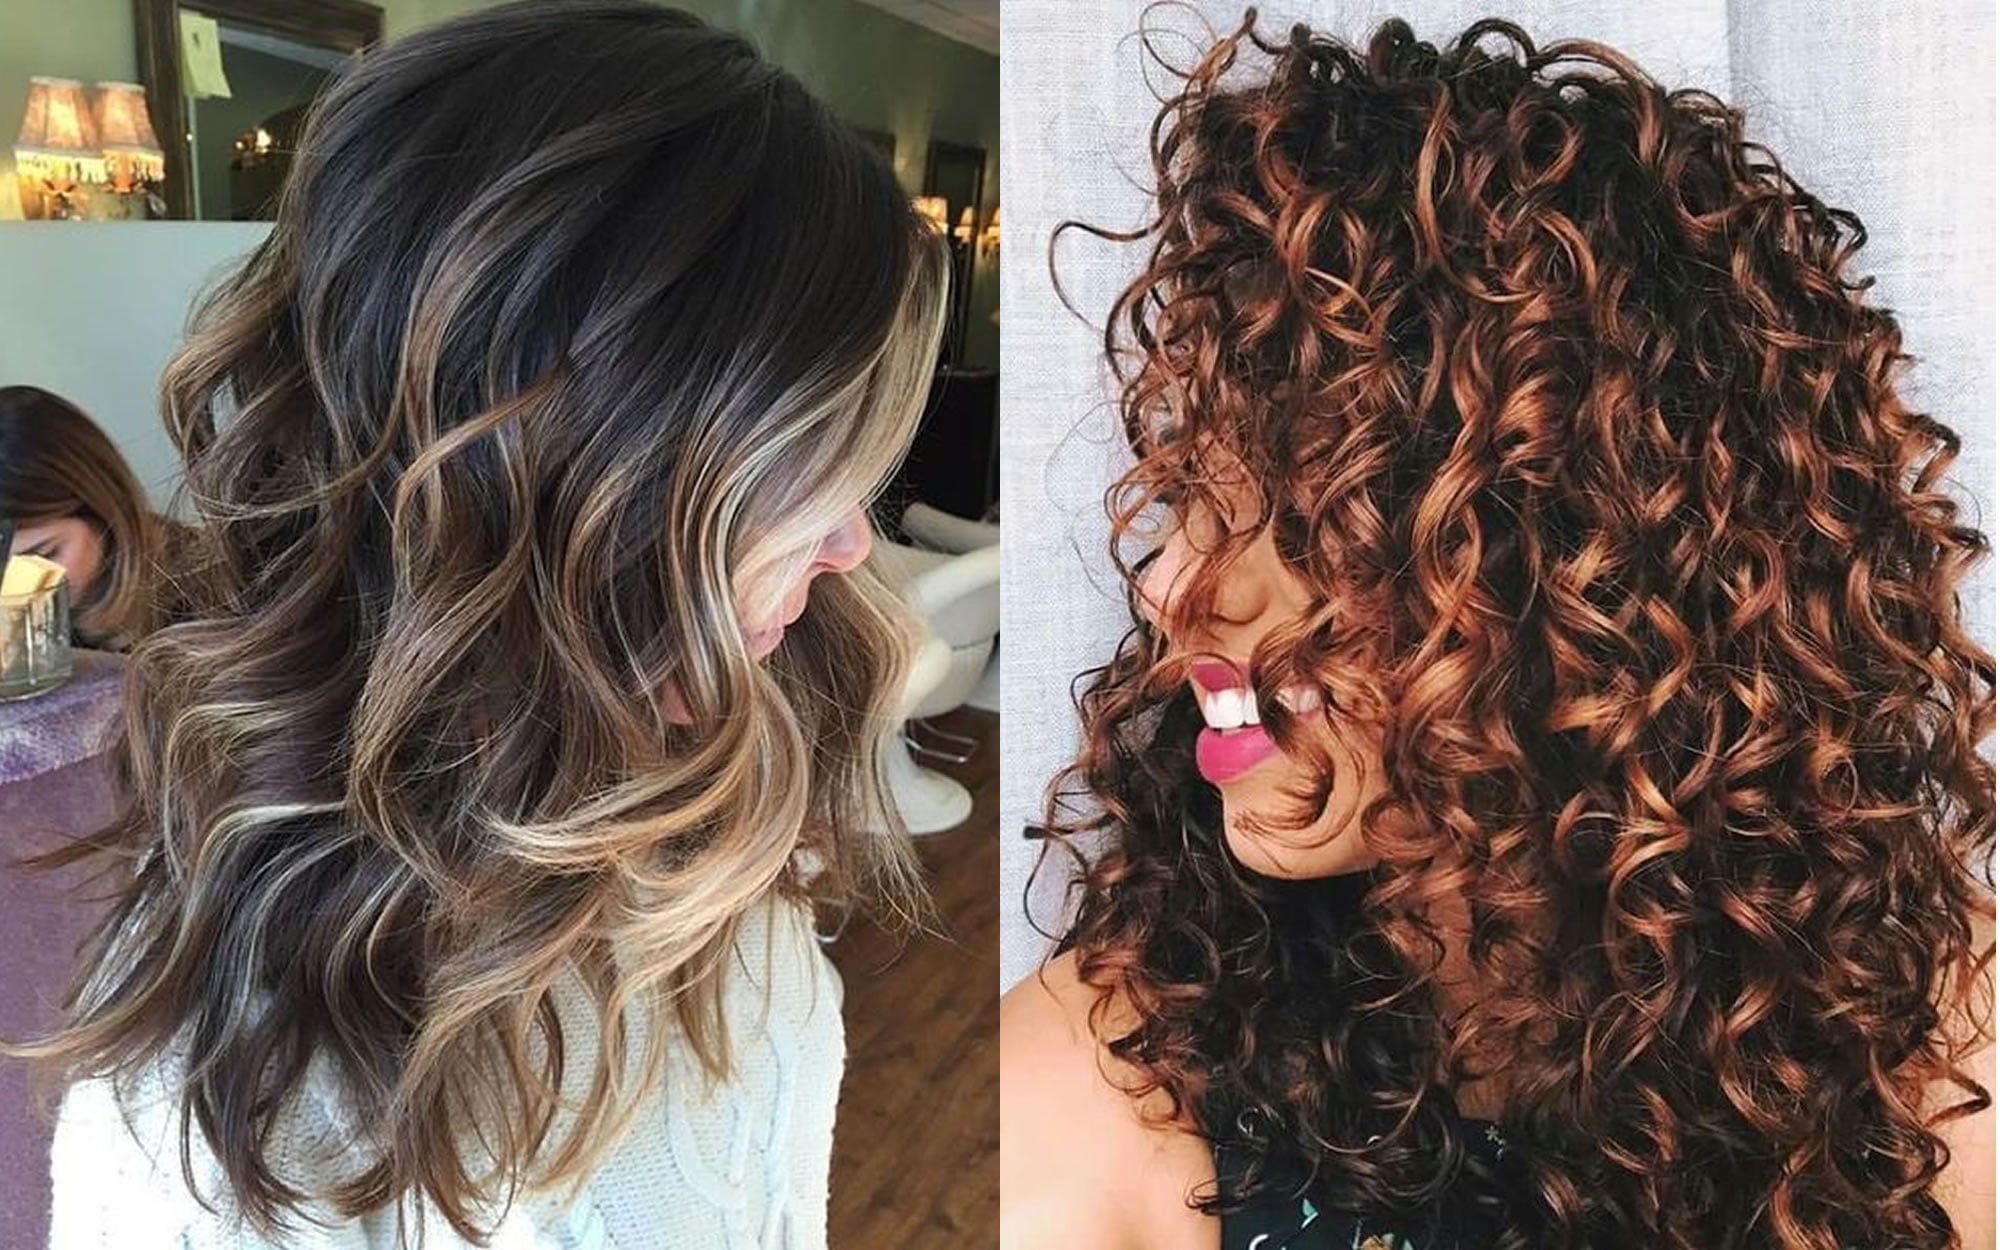 Medium hairstyles 2019 – Latest curly & wavy haircuts for 